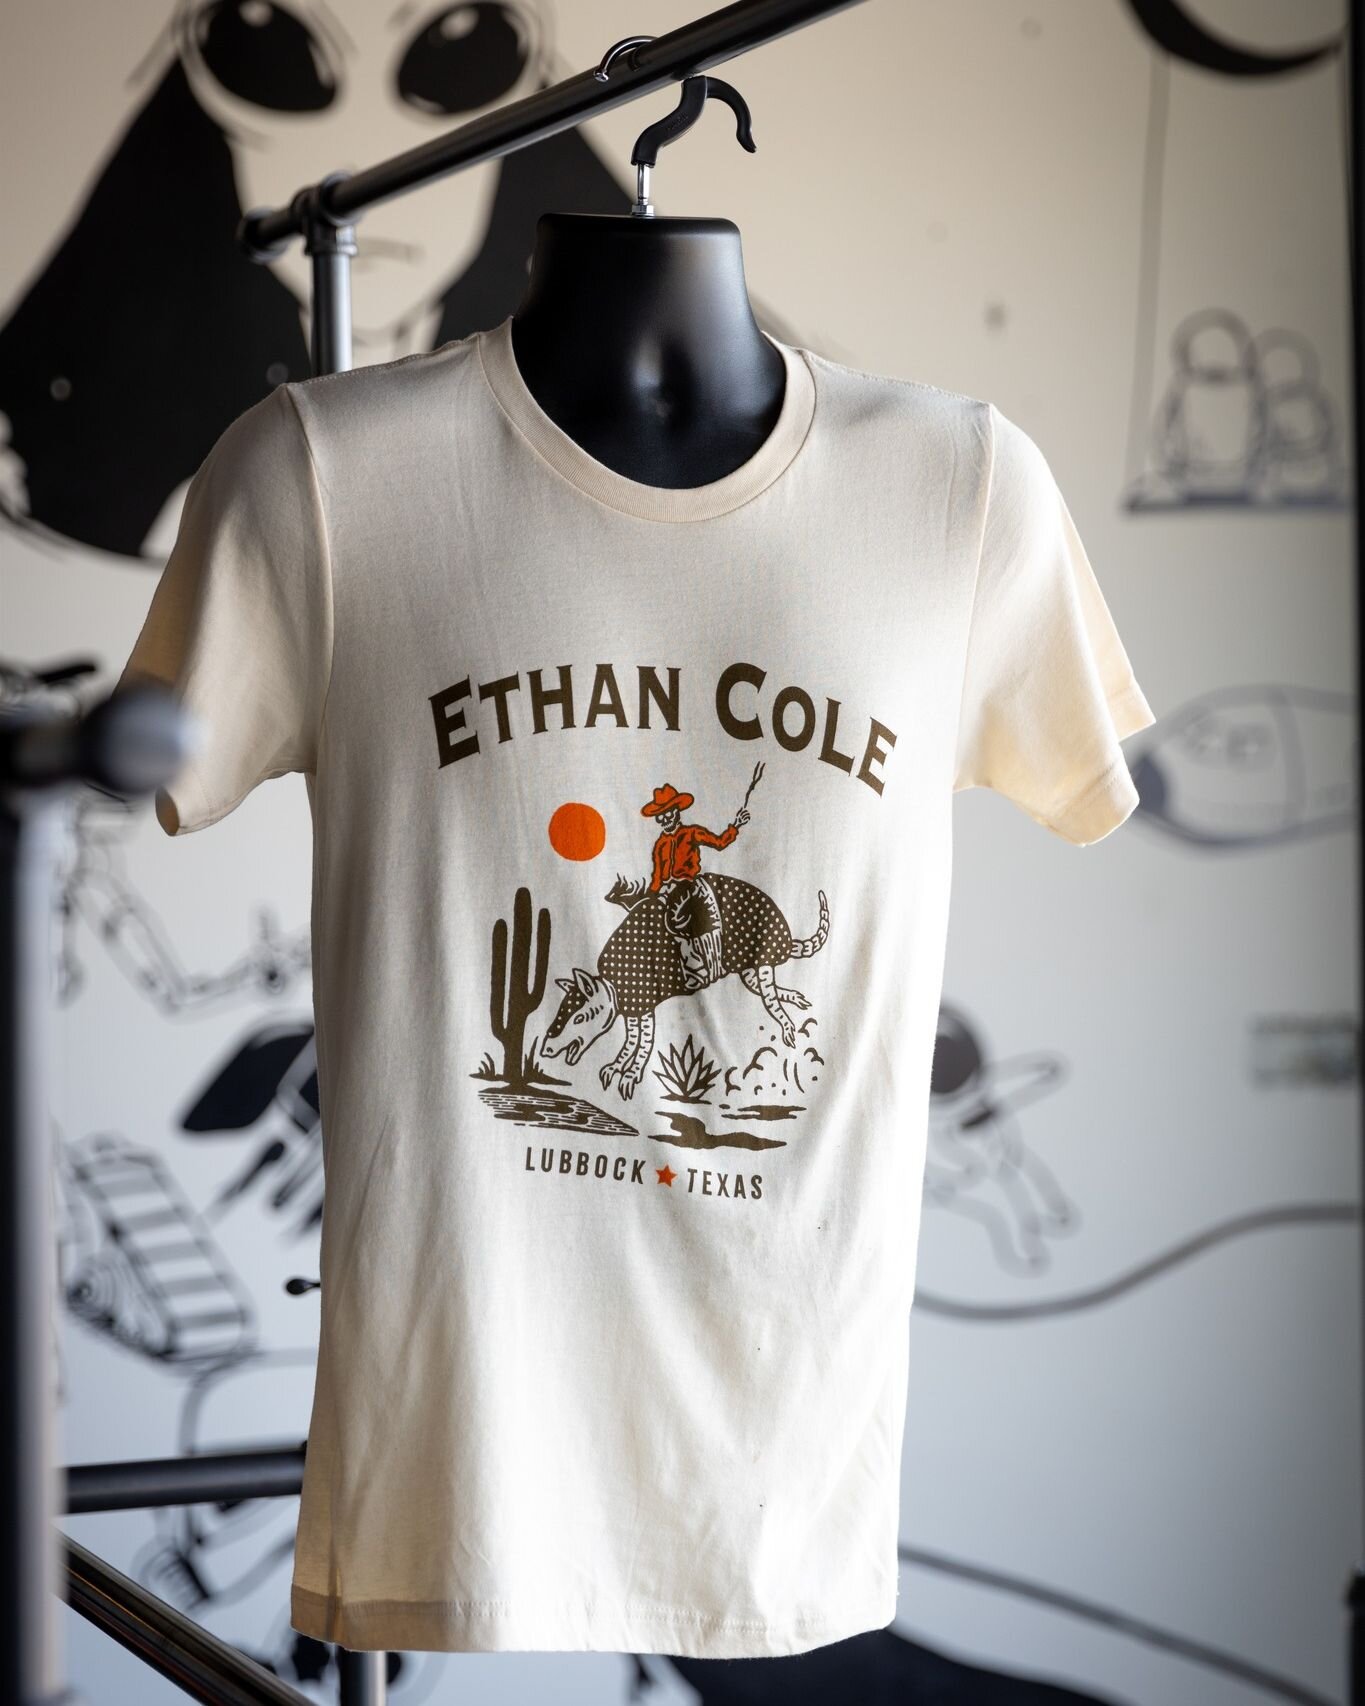 It was a pleasure to get to make @ethancole.music , a local Lubbock musician, these awesome shirts for his music. This kid is out here doing amazing things and it was great to have a piece in it. 

#lubbocktexas #shopsmall #screenprinting #johhnyvelv